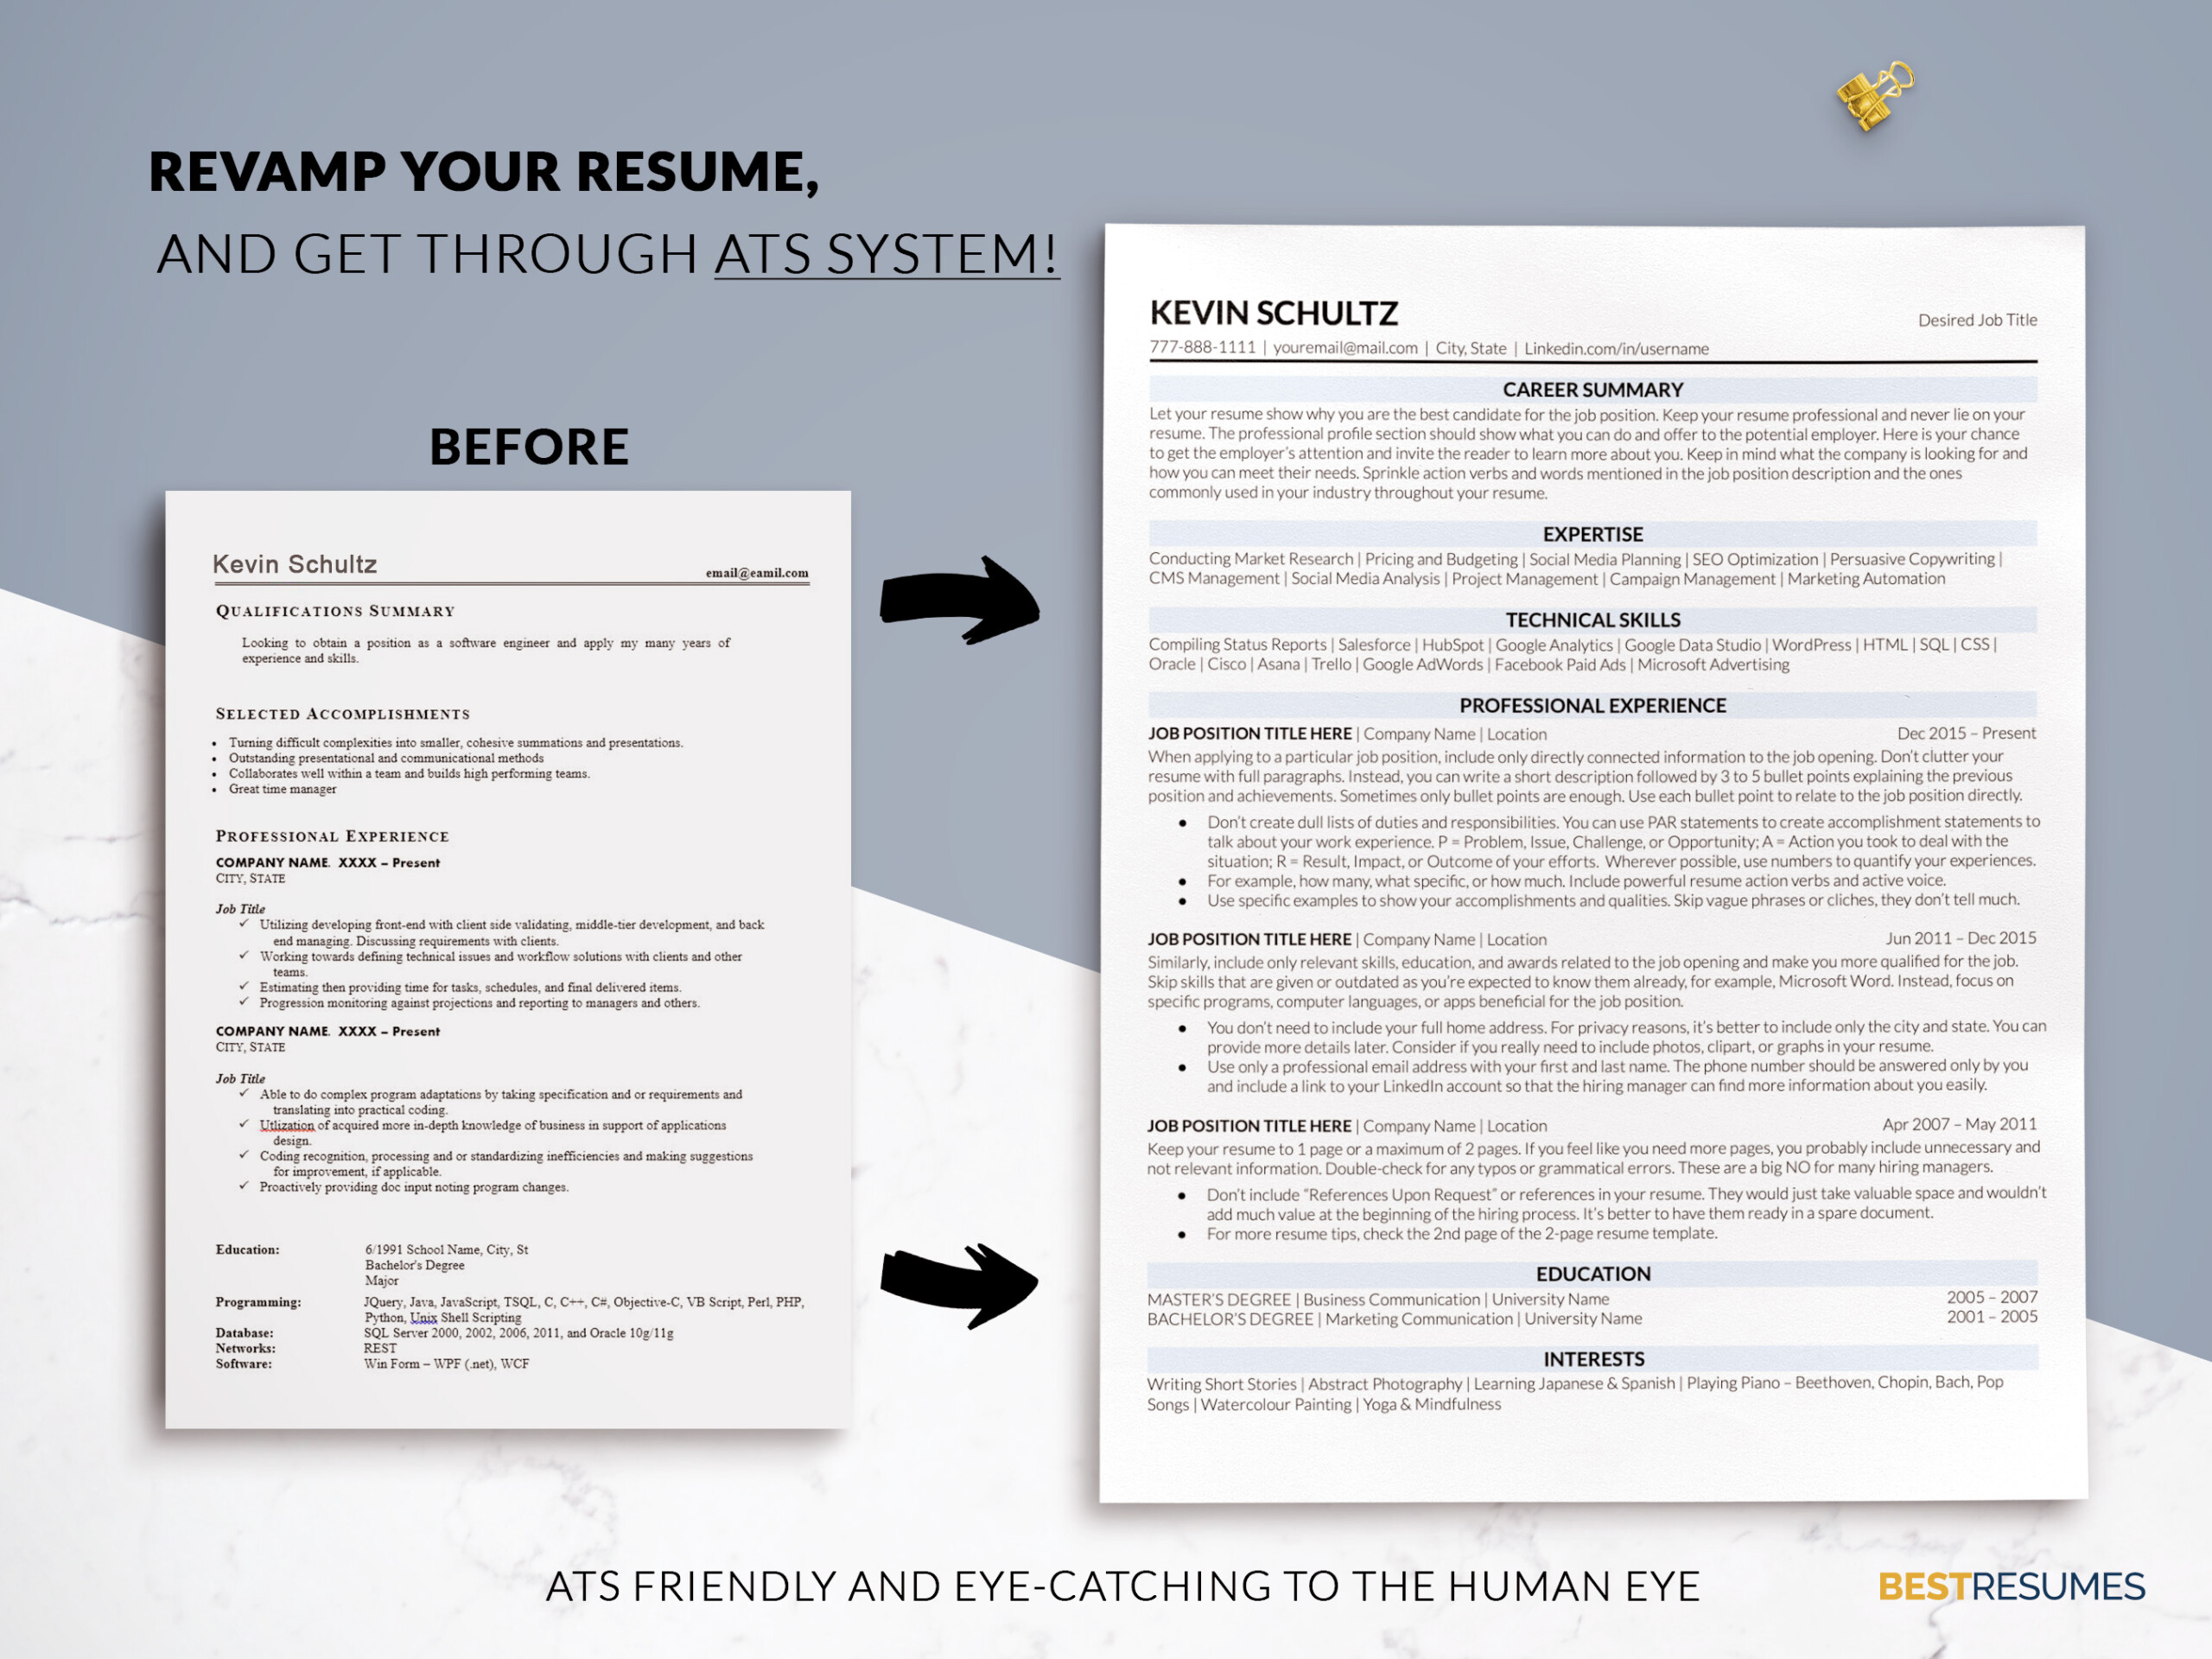 Professional ATS Resume Template Google Docs Revamp your Resume Kevin Schultz